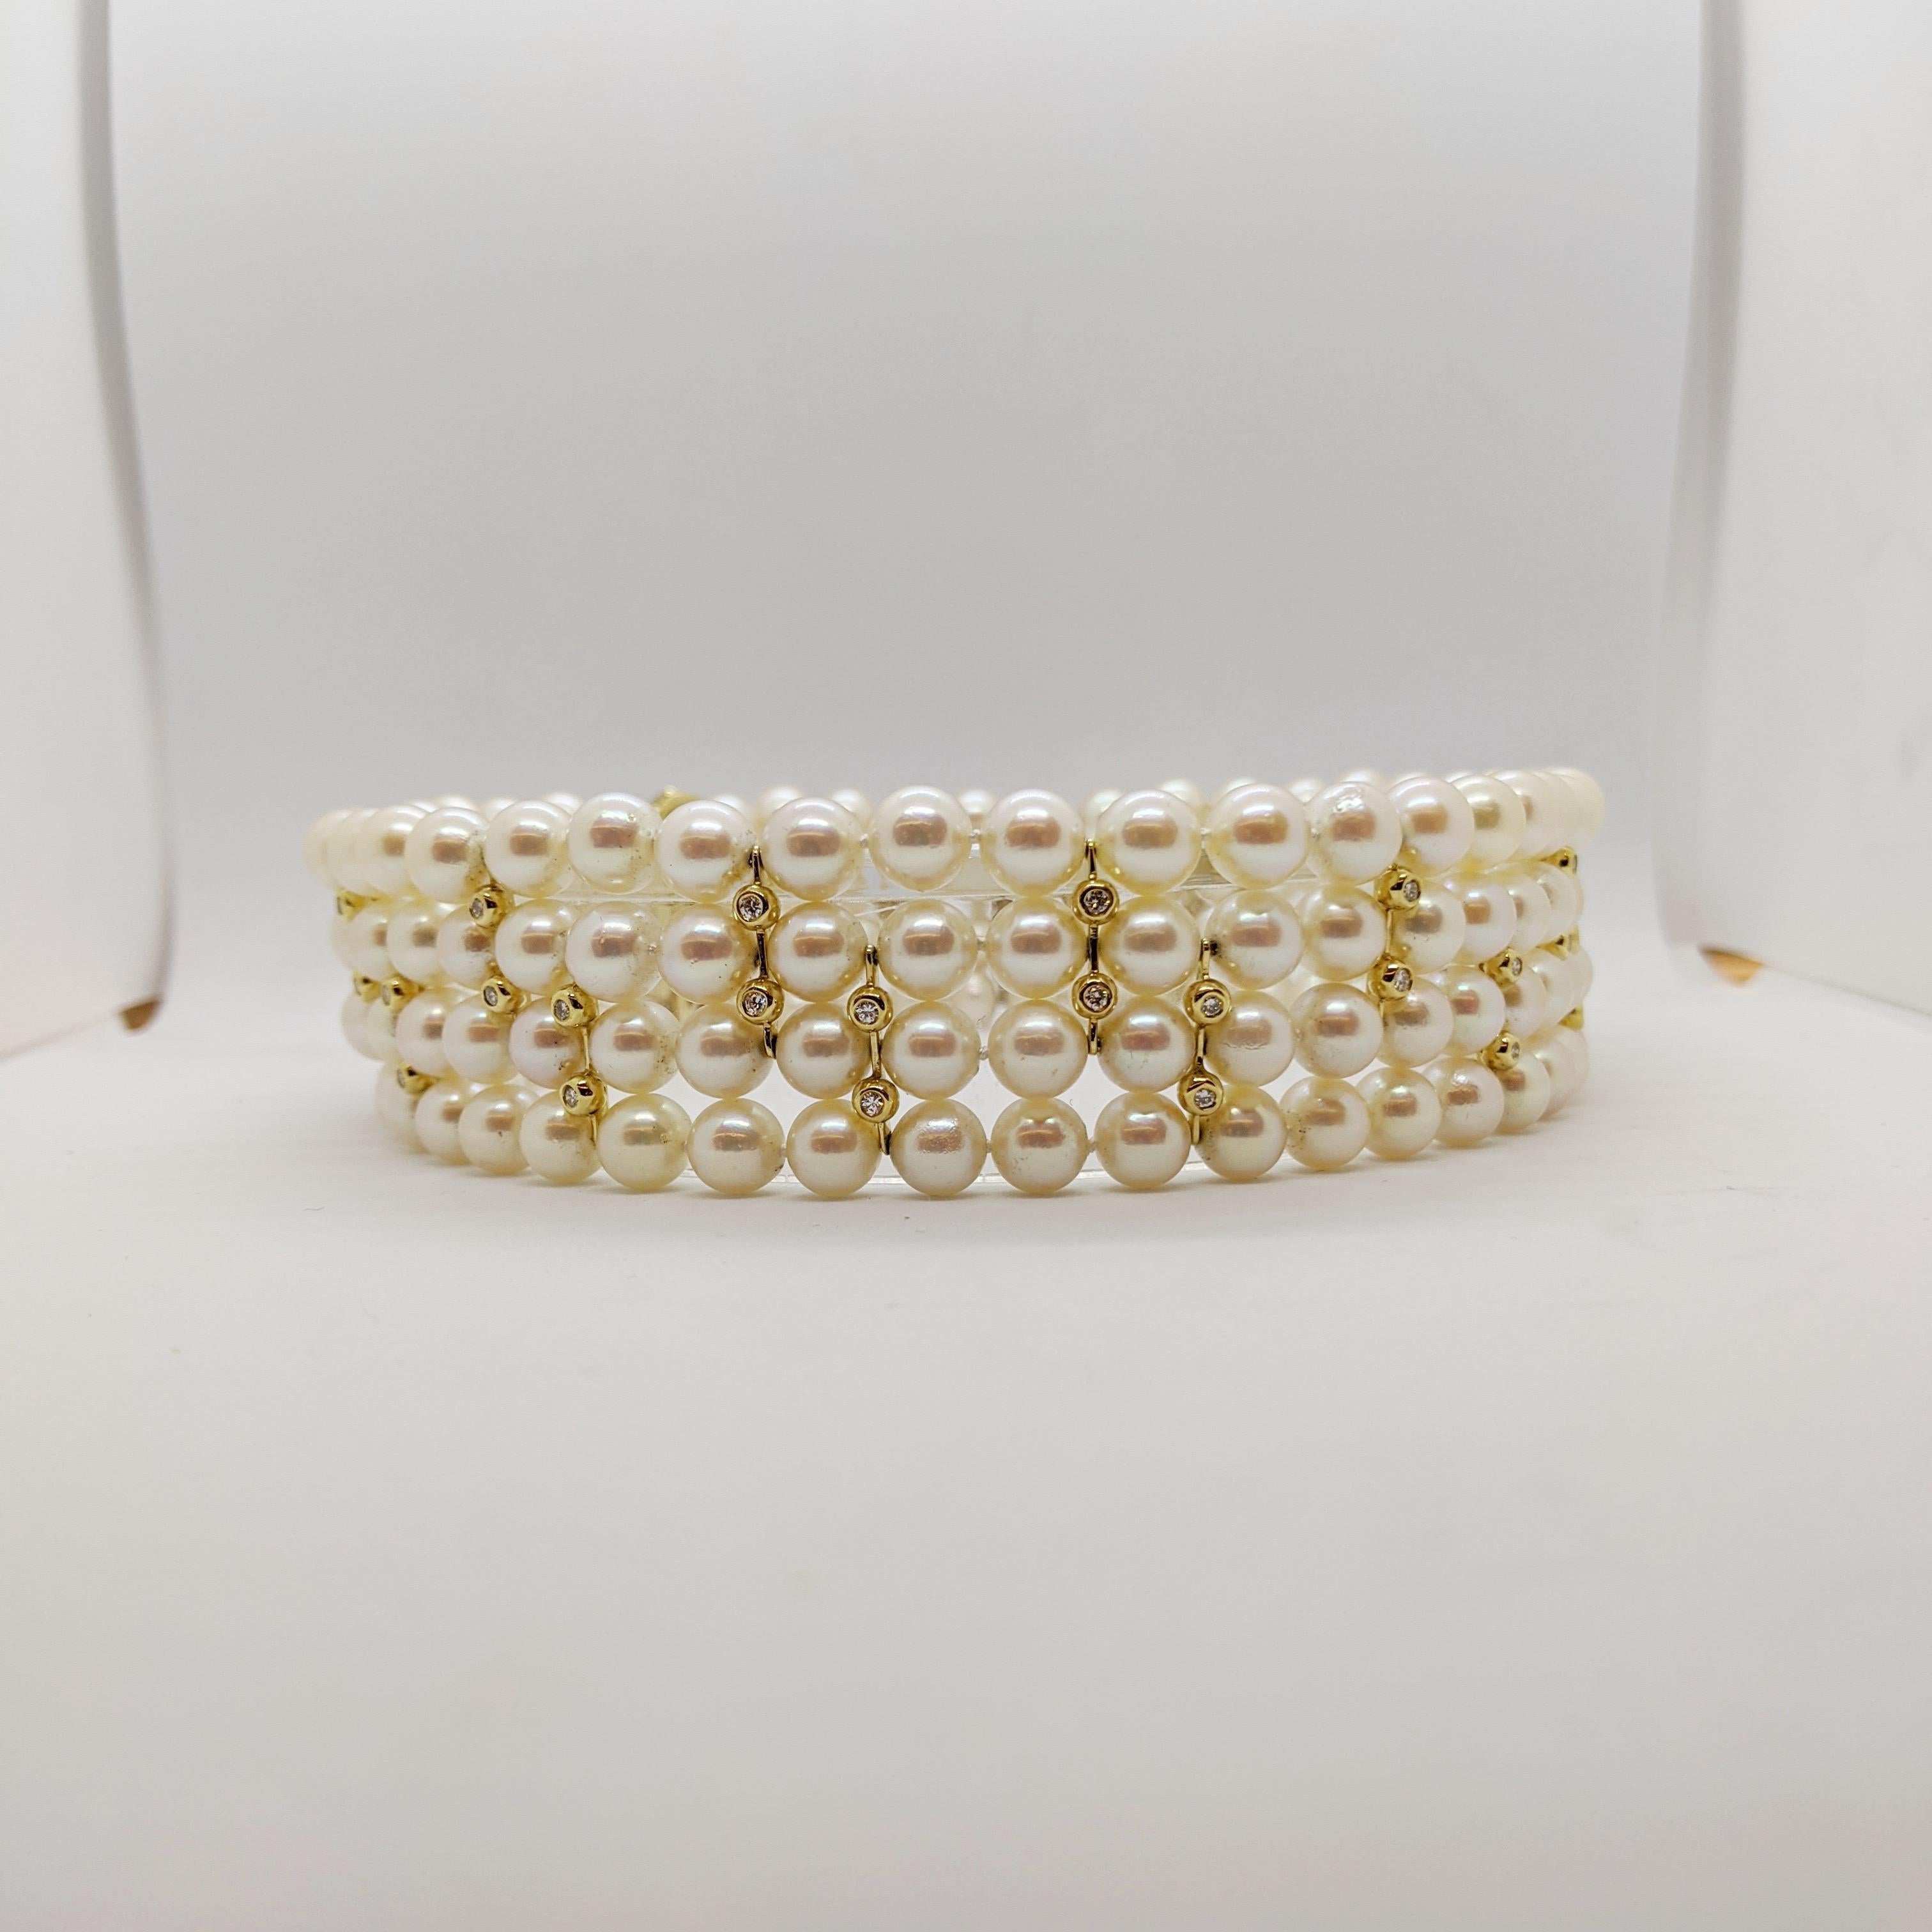 Steal the show with this magnificent Japanese cultured pearl choker. Comprised of 4 rows of AAA 8mm Japanese cultured pearls. The beauty of these pearls is further enhances with 18kt yellow gold and diamond dividers, adding just the right amount of